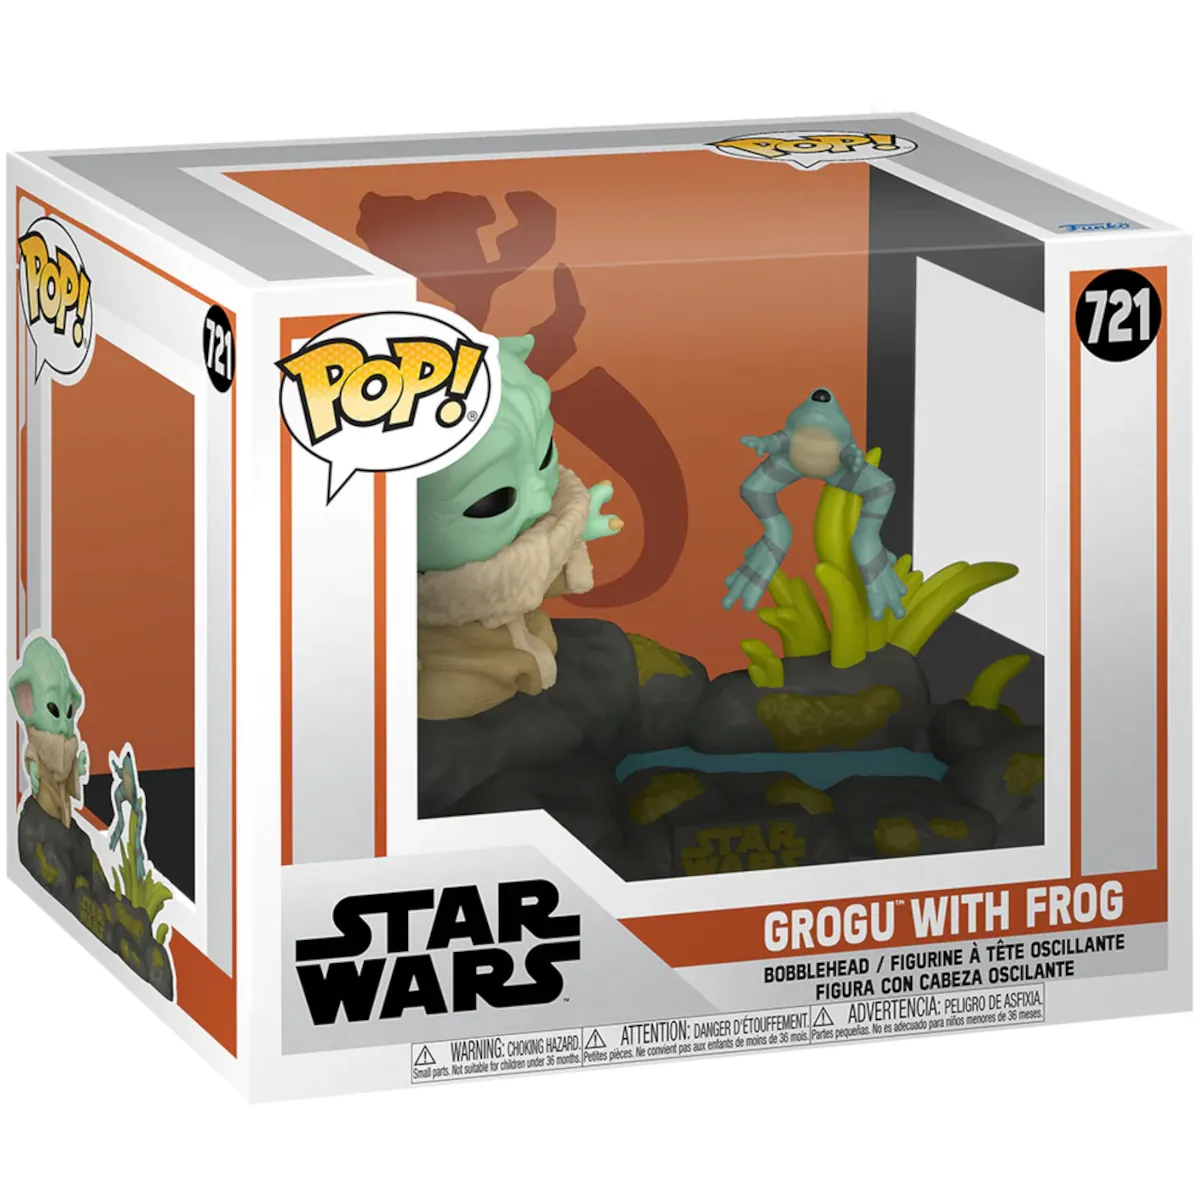 80000 Funko Pop! Television - Star Wars The Mandalorian - Grogu with Frog Collectable Vinyl Figure Box Front